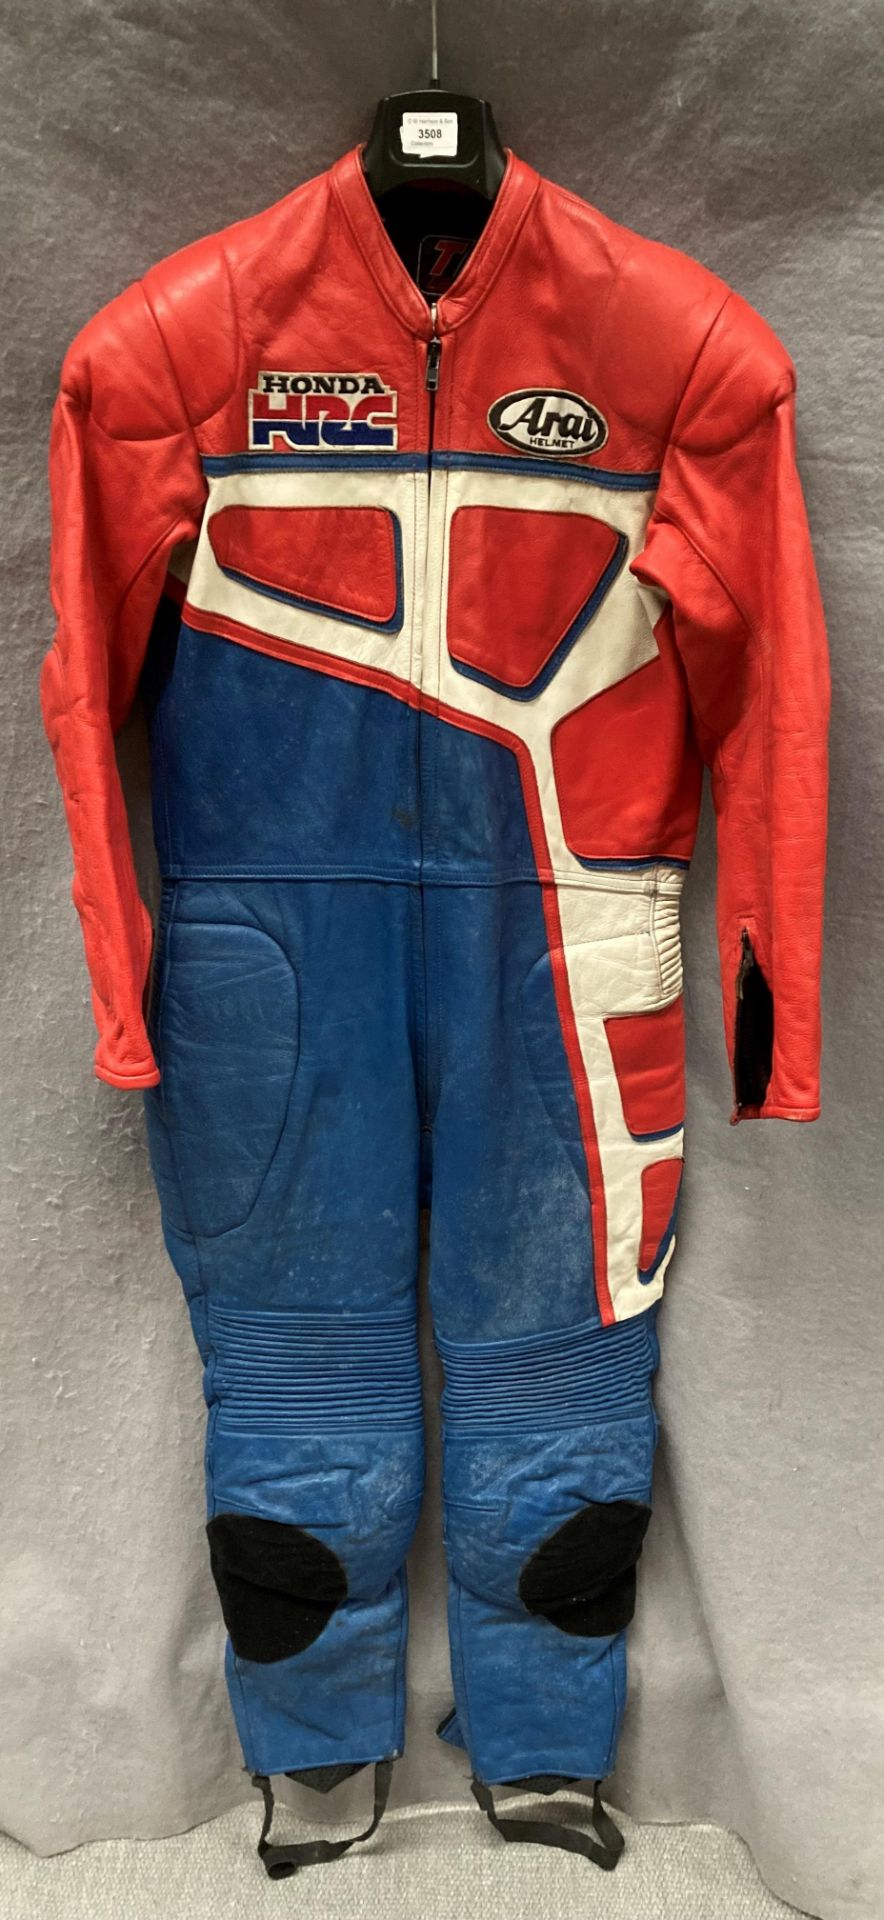 Vintage TT leathers motorbike suit/leathers in red,